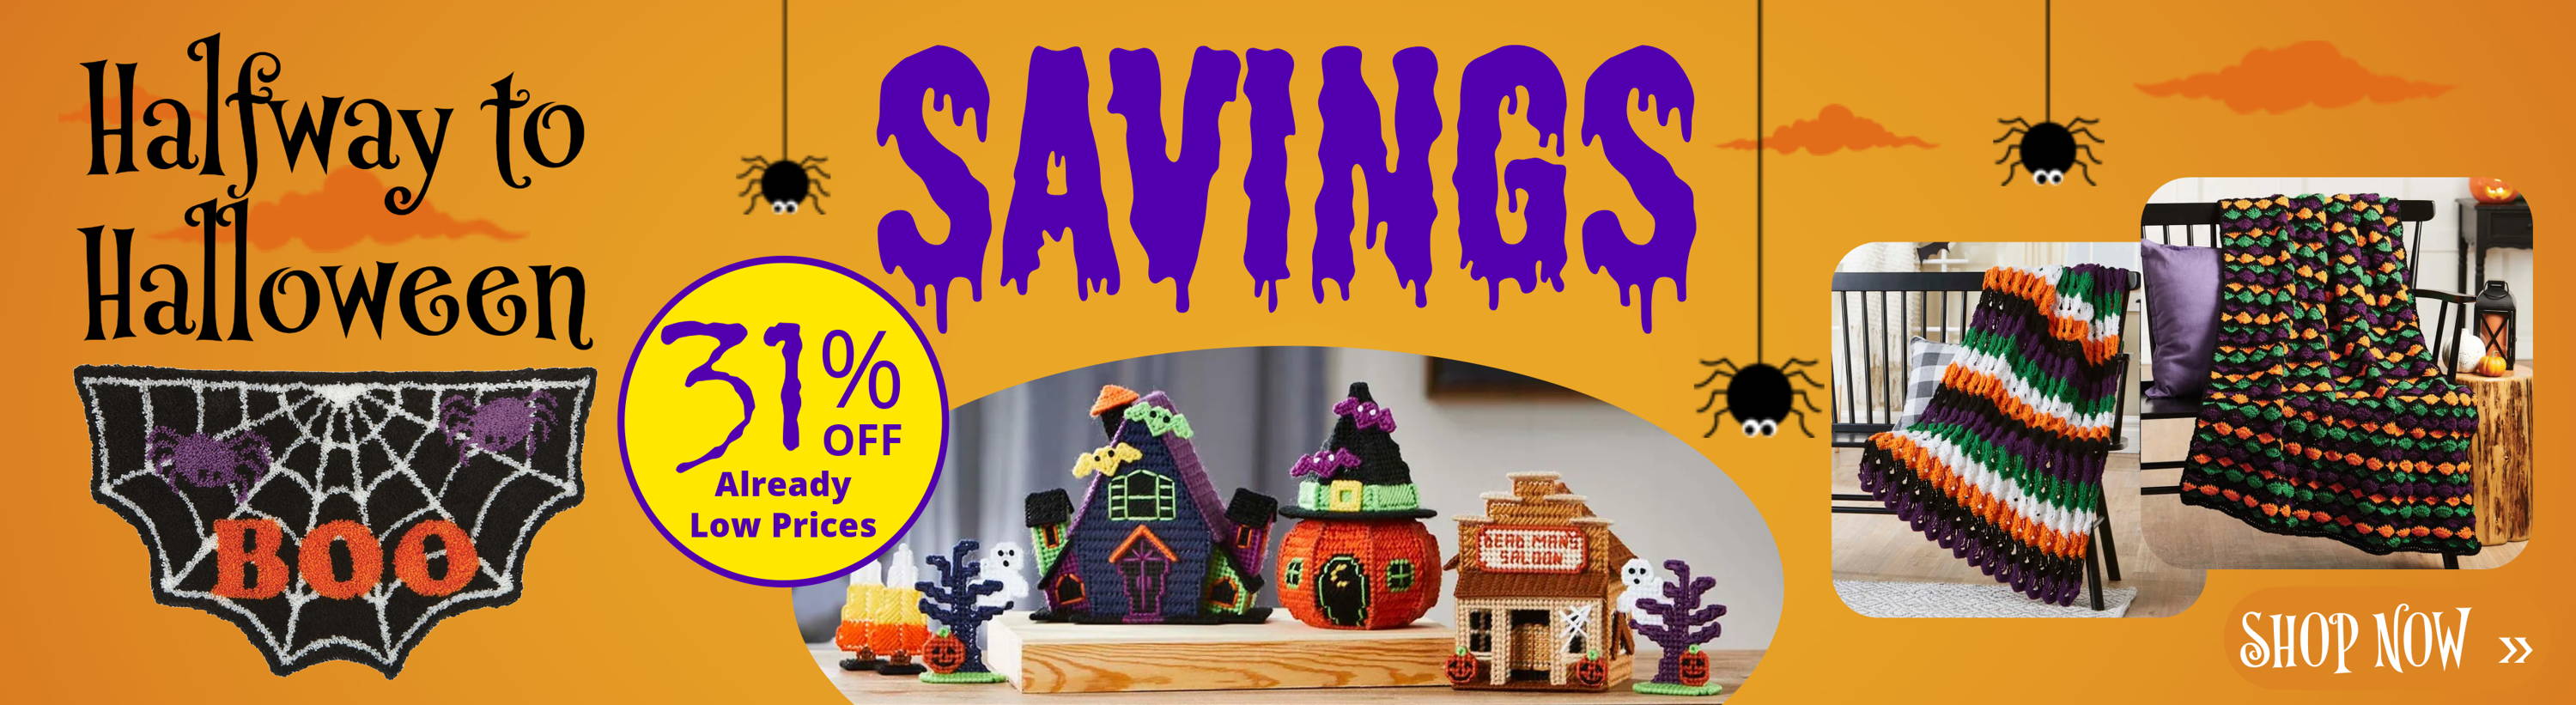 Halfway to Halloween Savings, 31% off already low prices to Shop. Image: Featured Halloween projects.